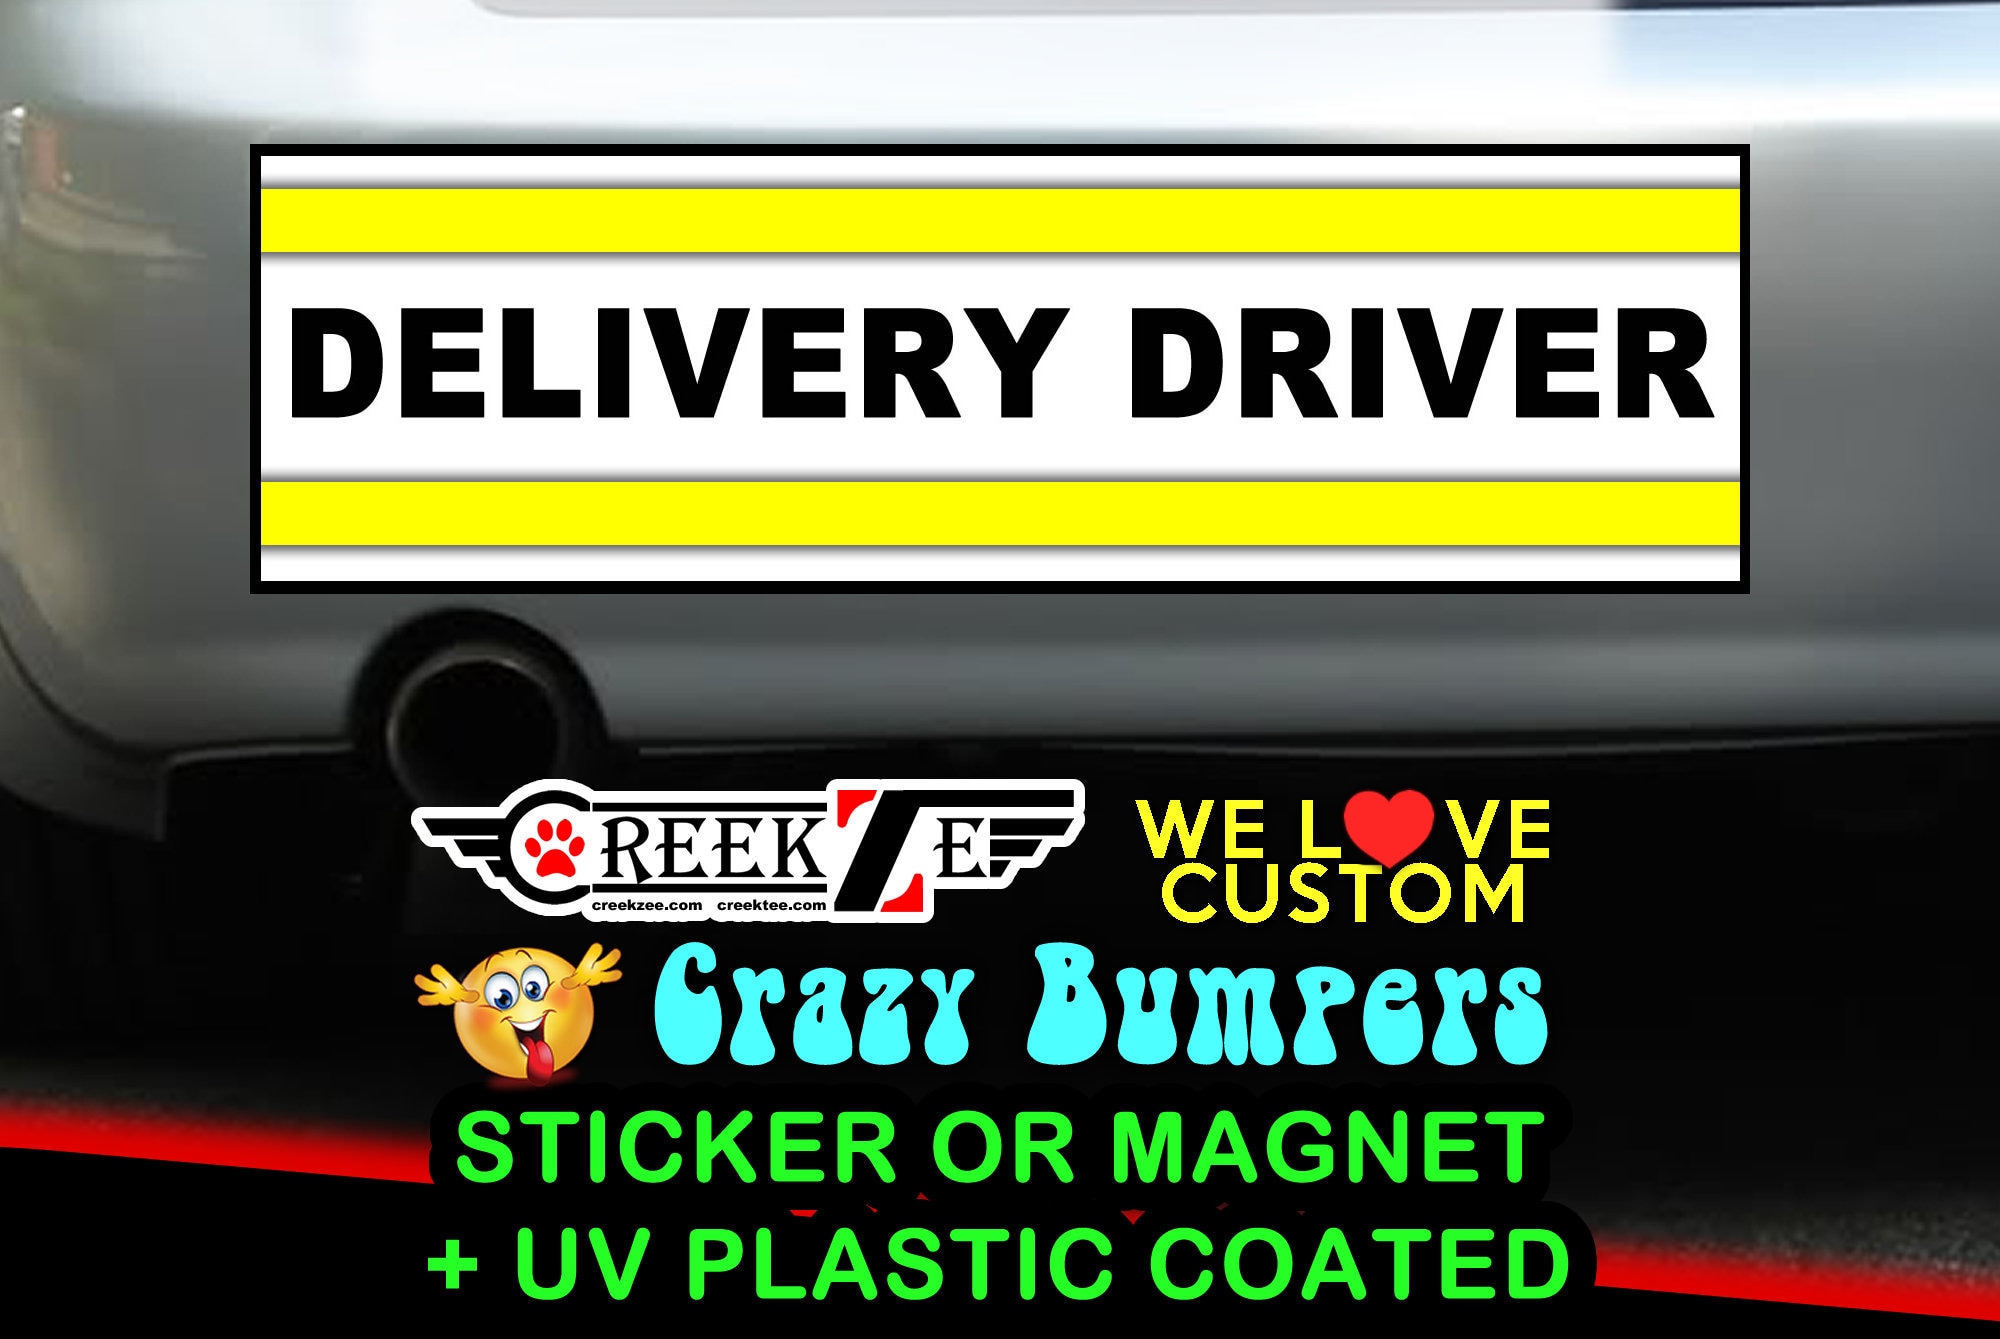 DELIVERY DRIVER 10 x 3 Bumper Sticker or Magnetic Bumper Sticker Available